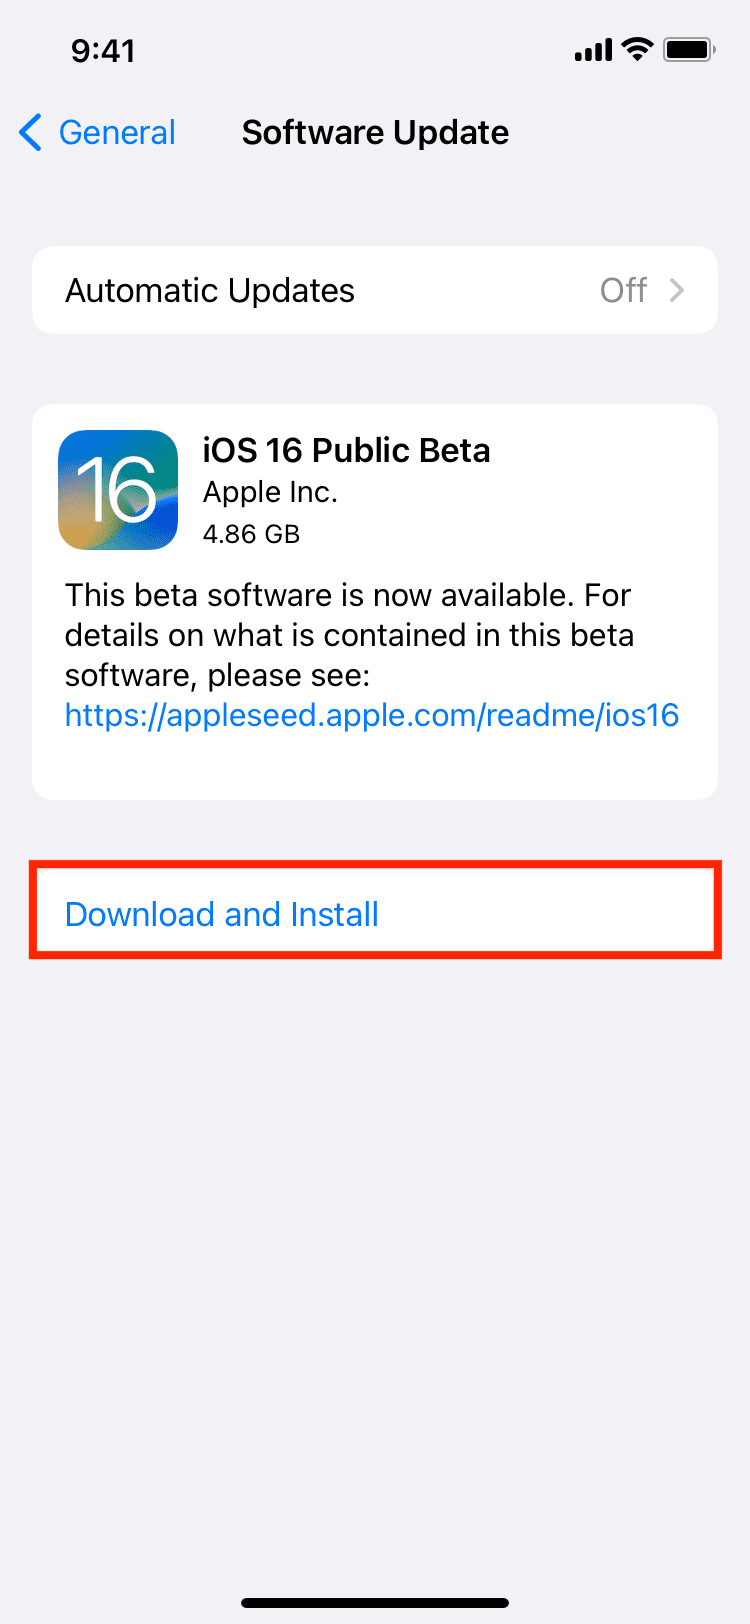 Tap Download and Install to get iOS 16